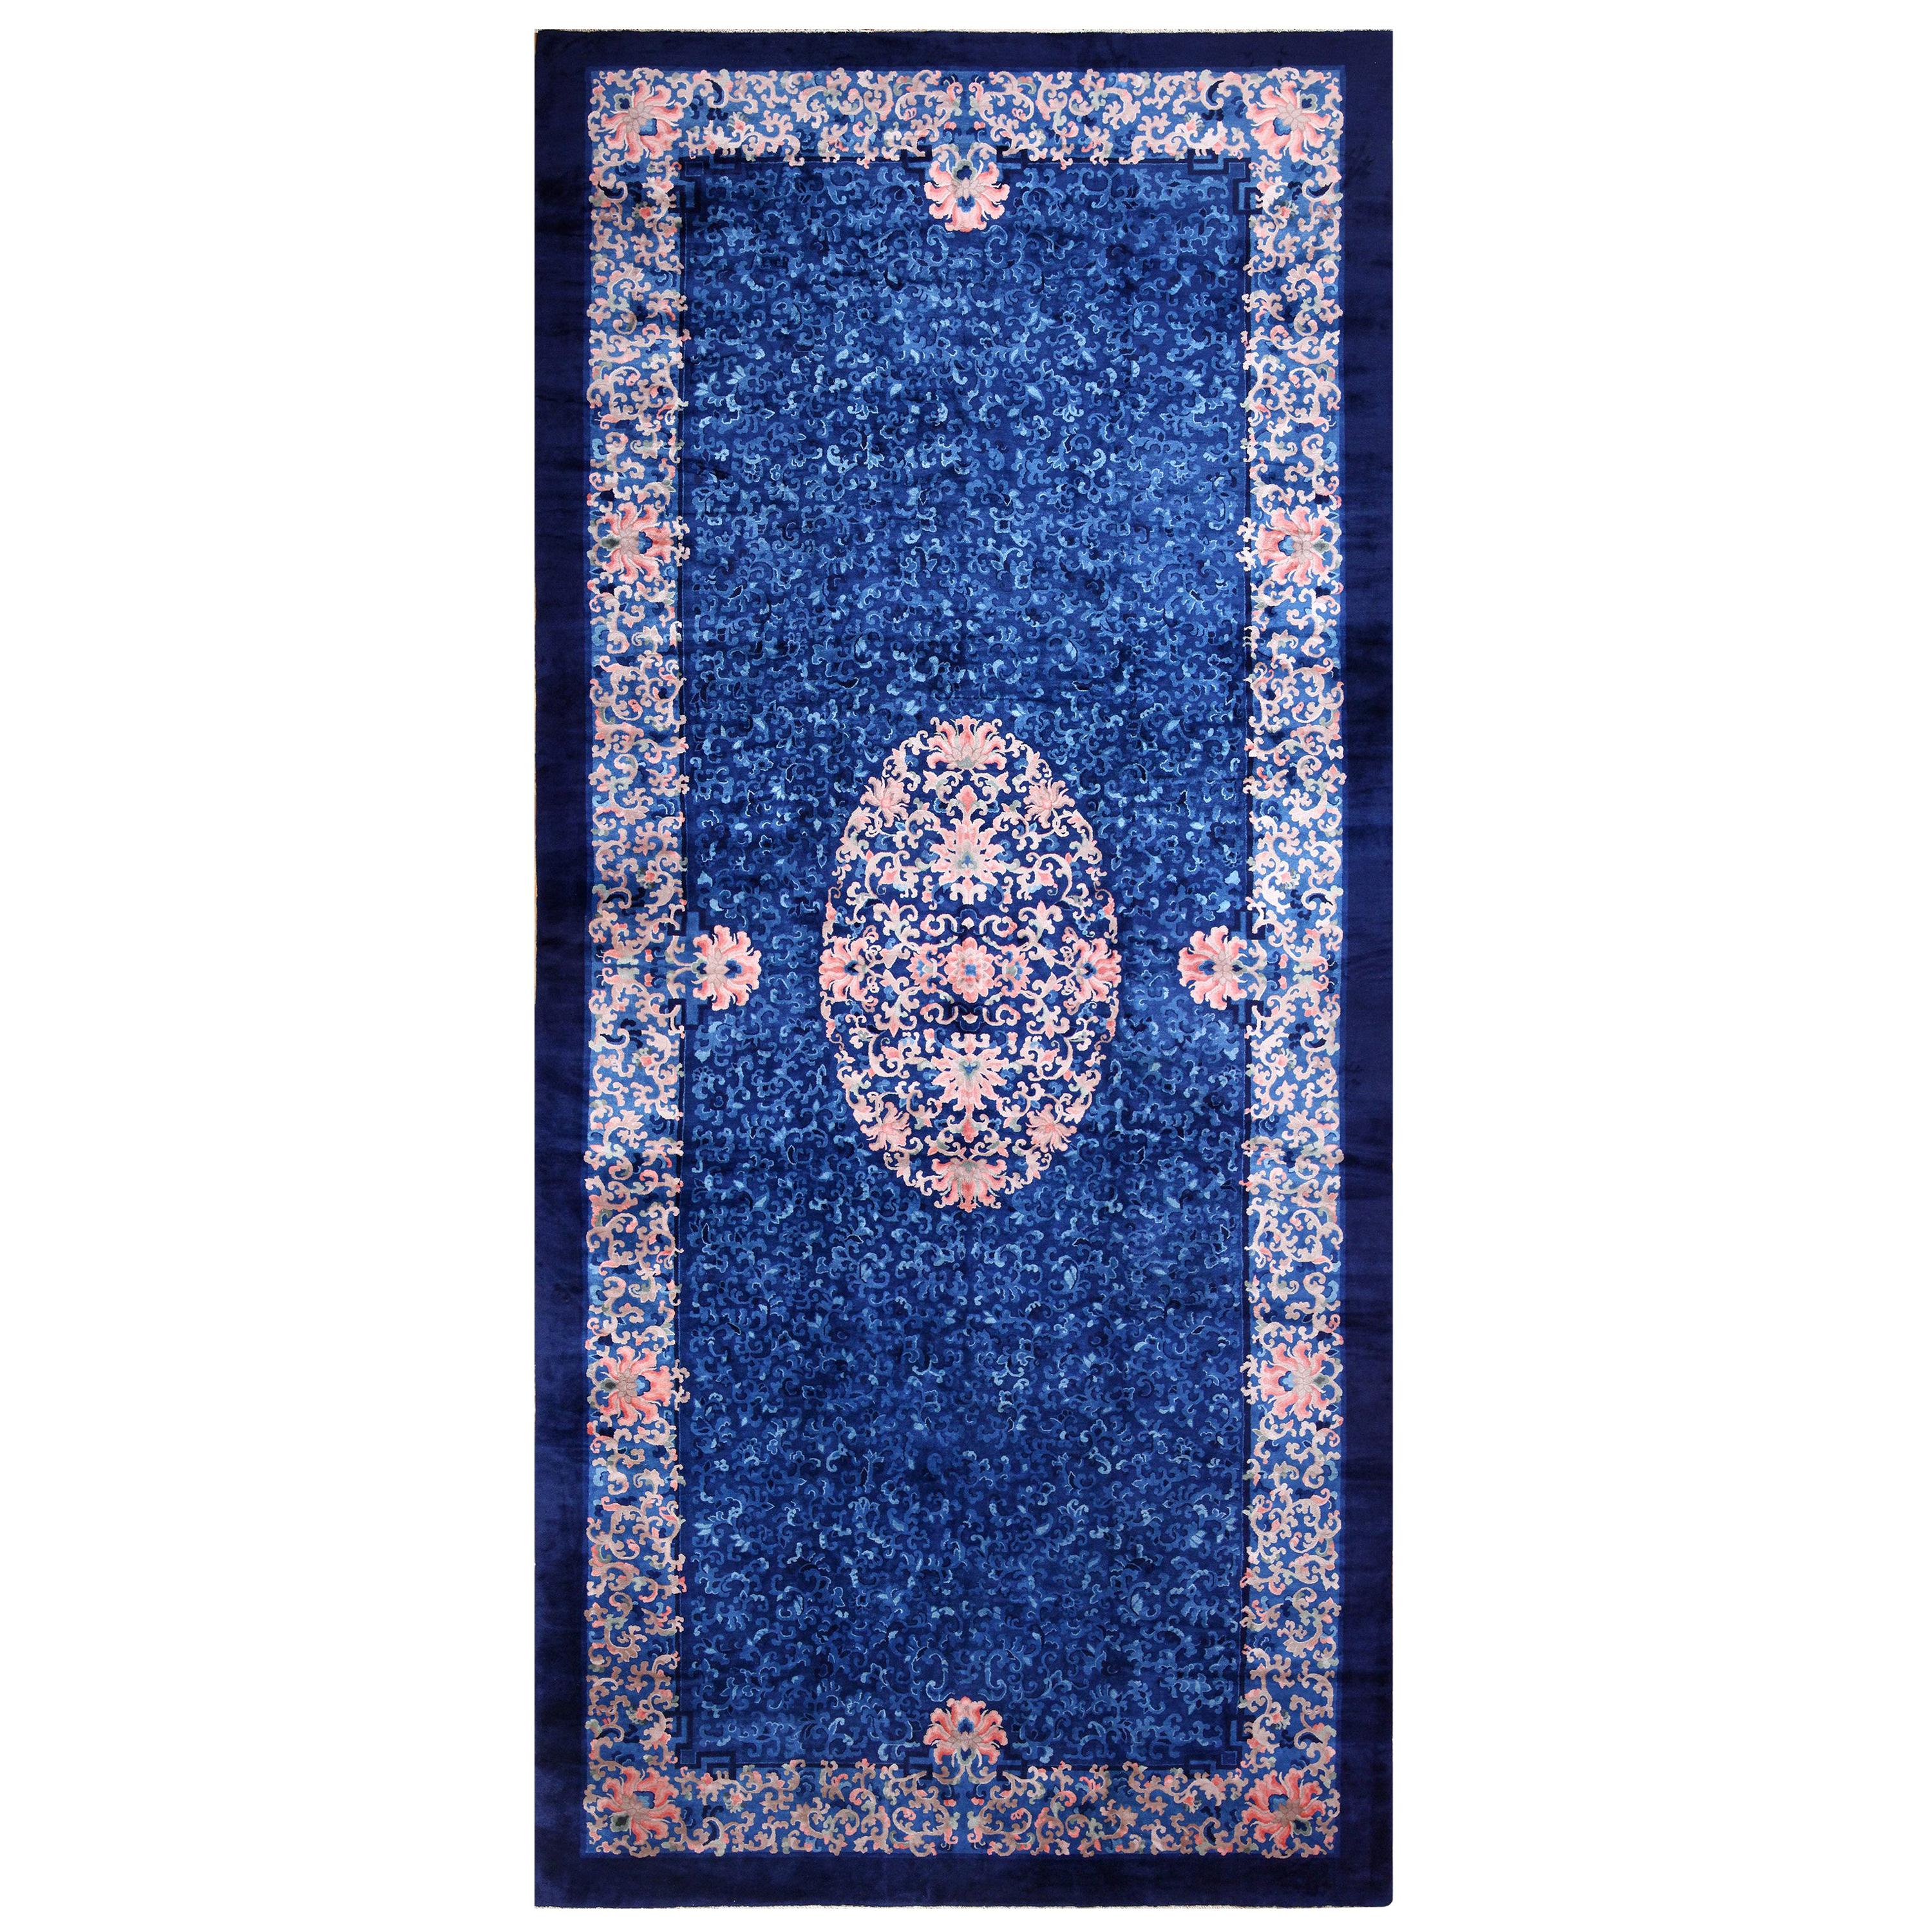 Tapis chinois ancien bleu. Taille : 11 ft 1 in x 24 ft 6 in 